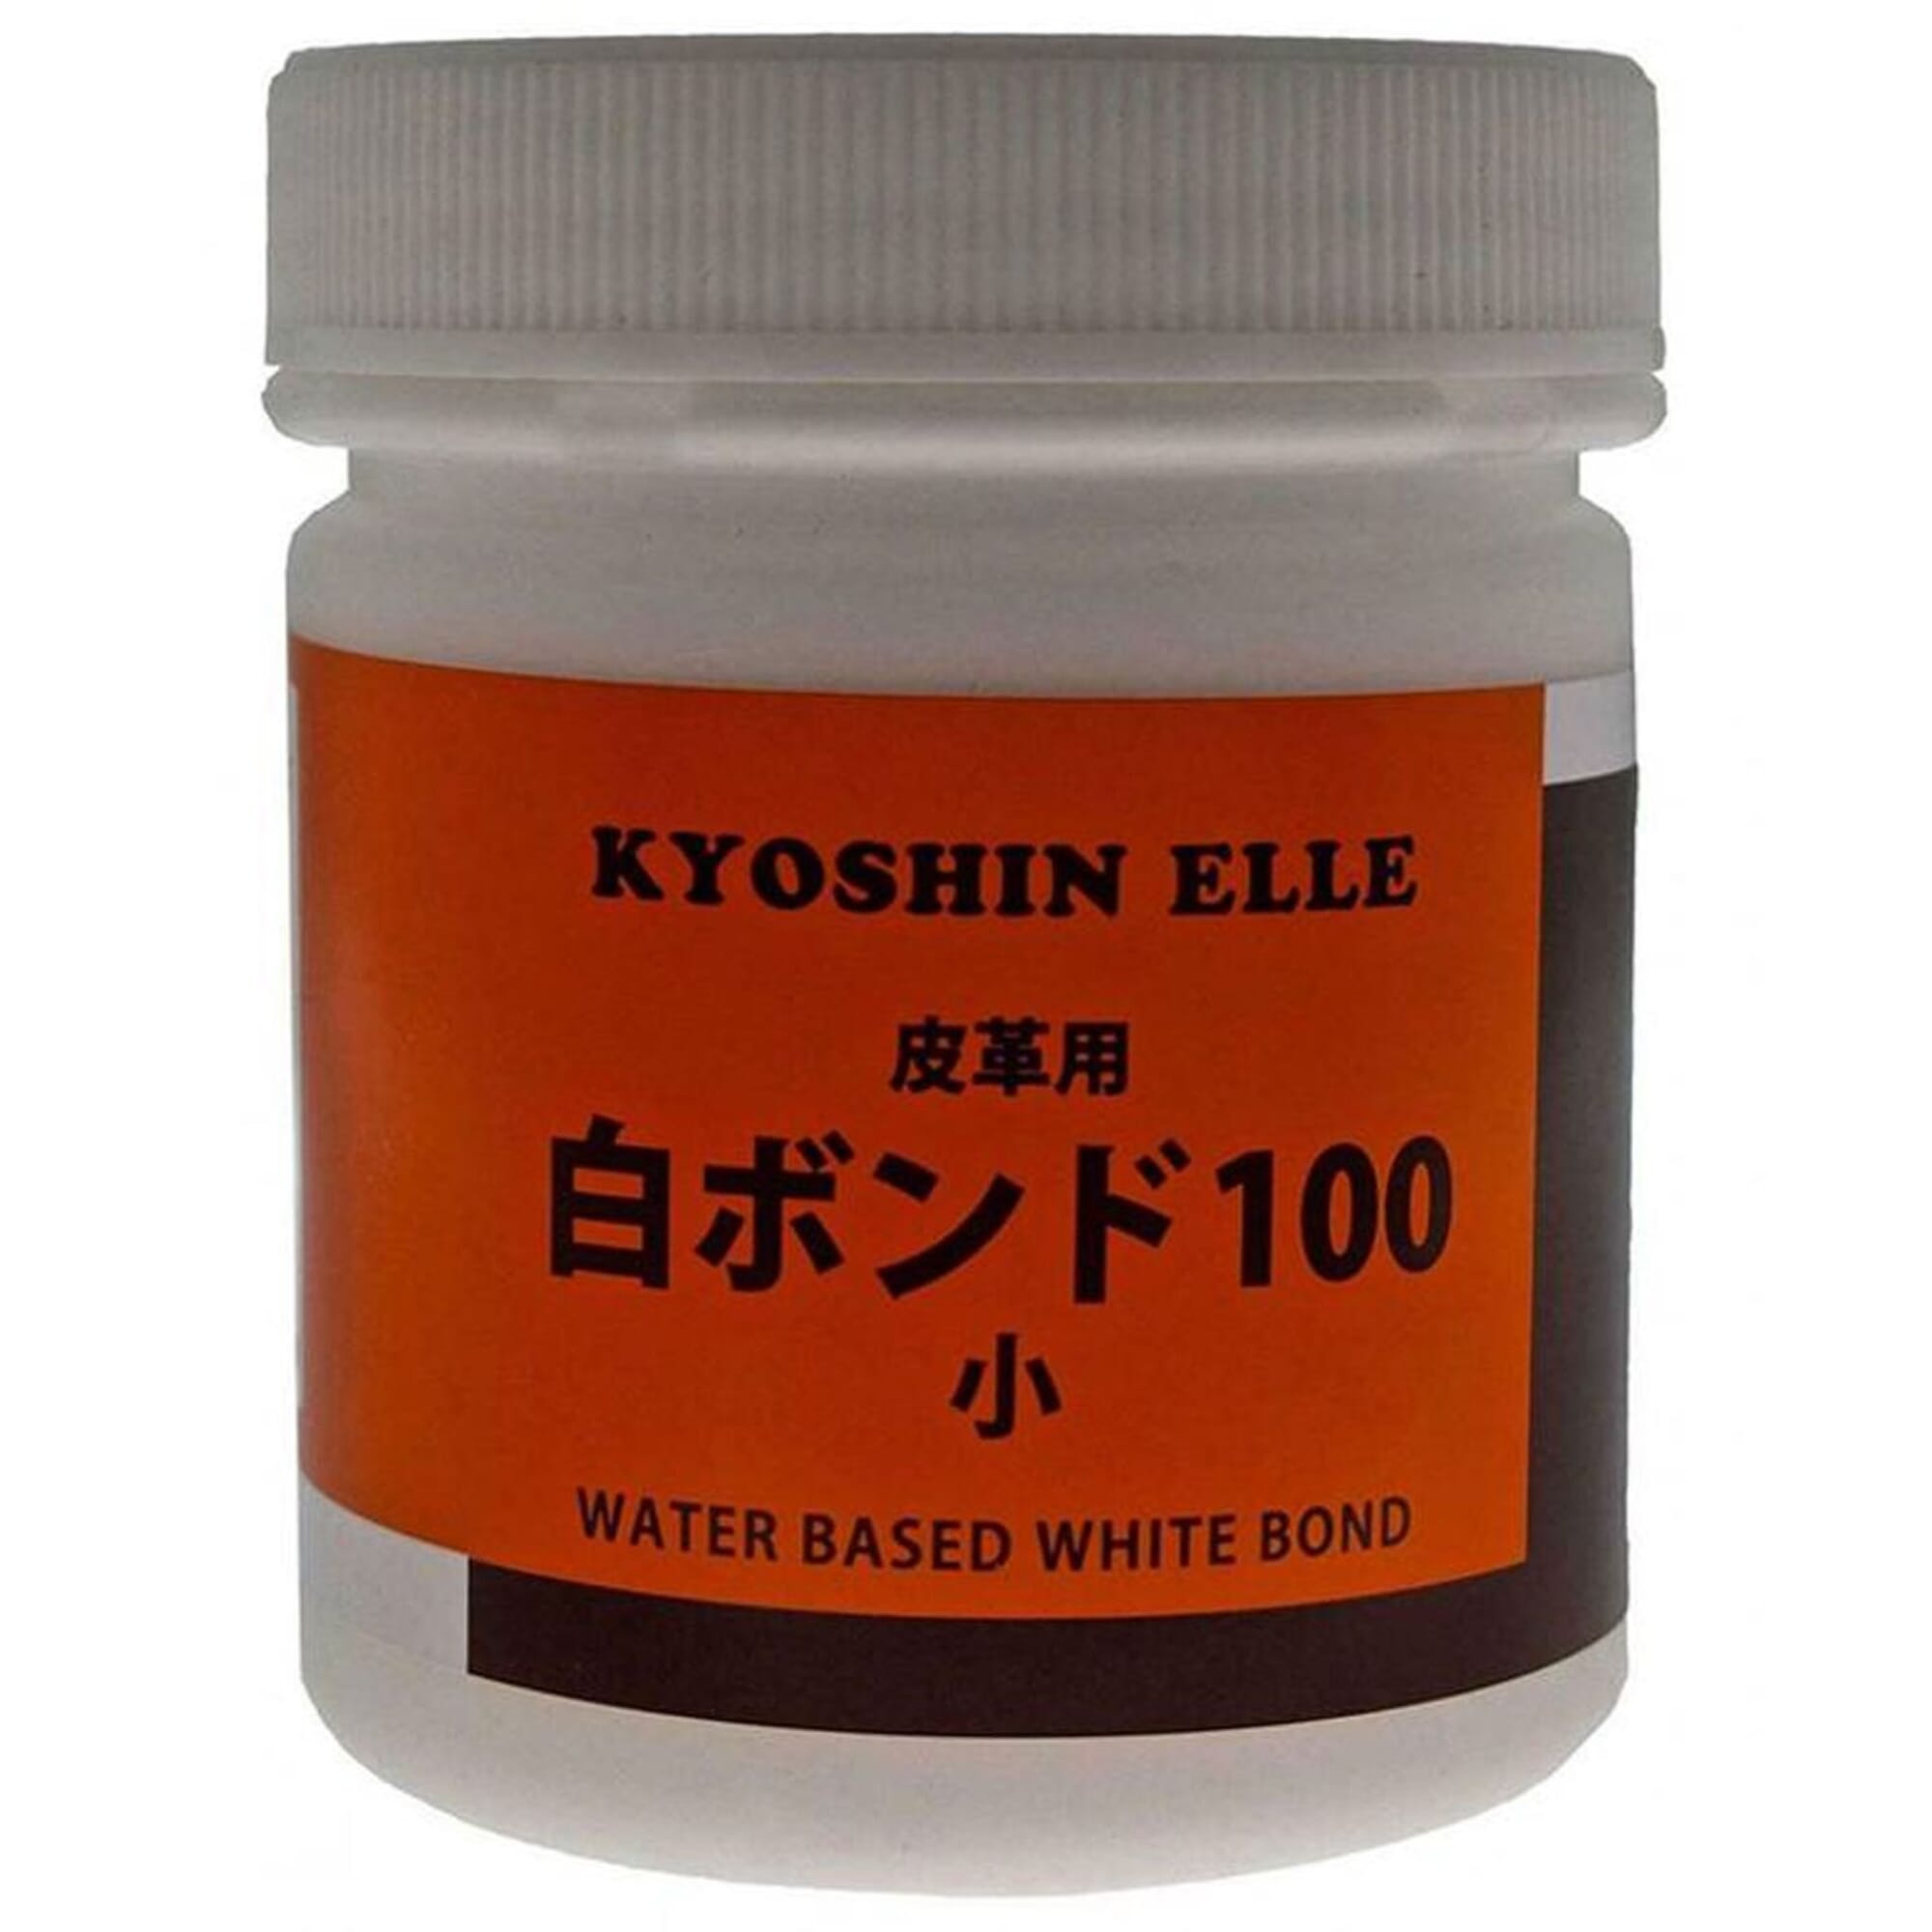 Kyoshin Elle 100 Leathercraft Cement Flexible Glue Leather Craft from Japan